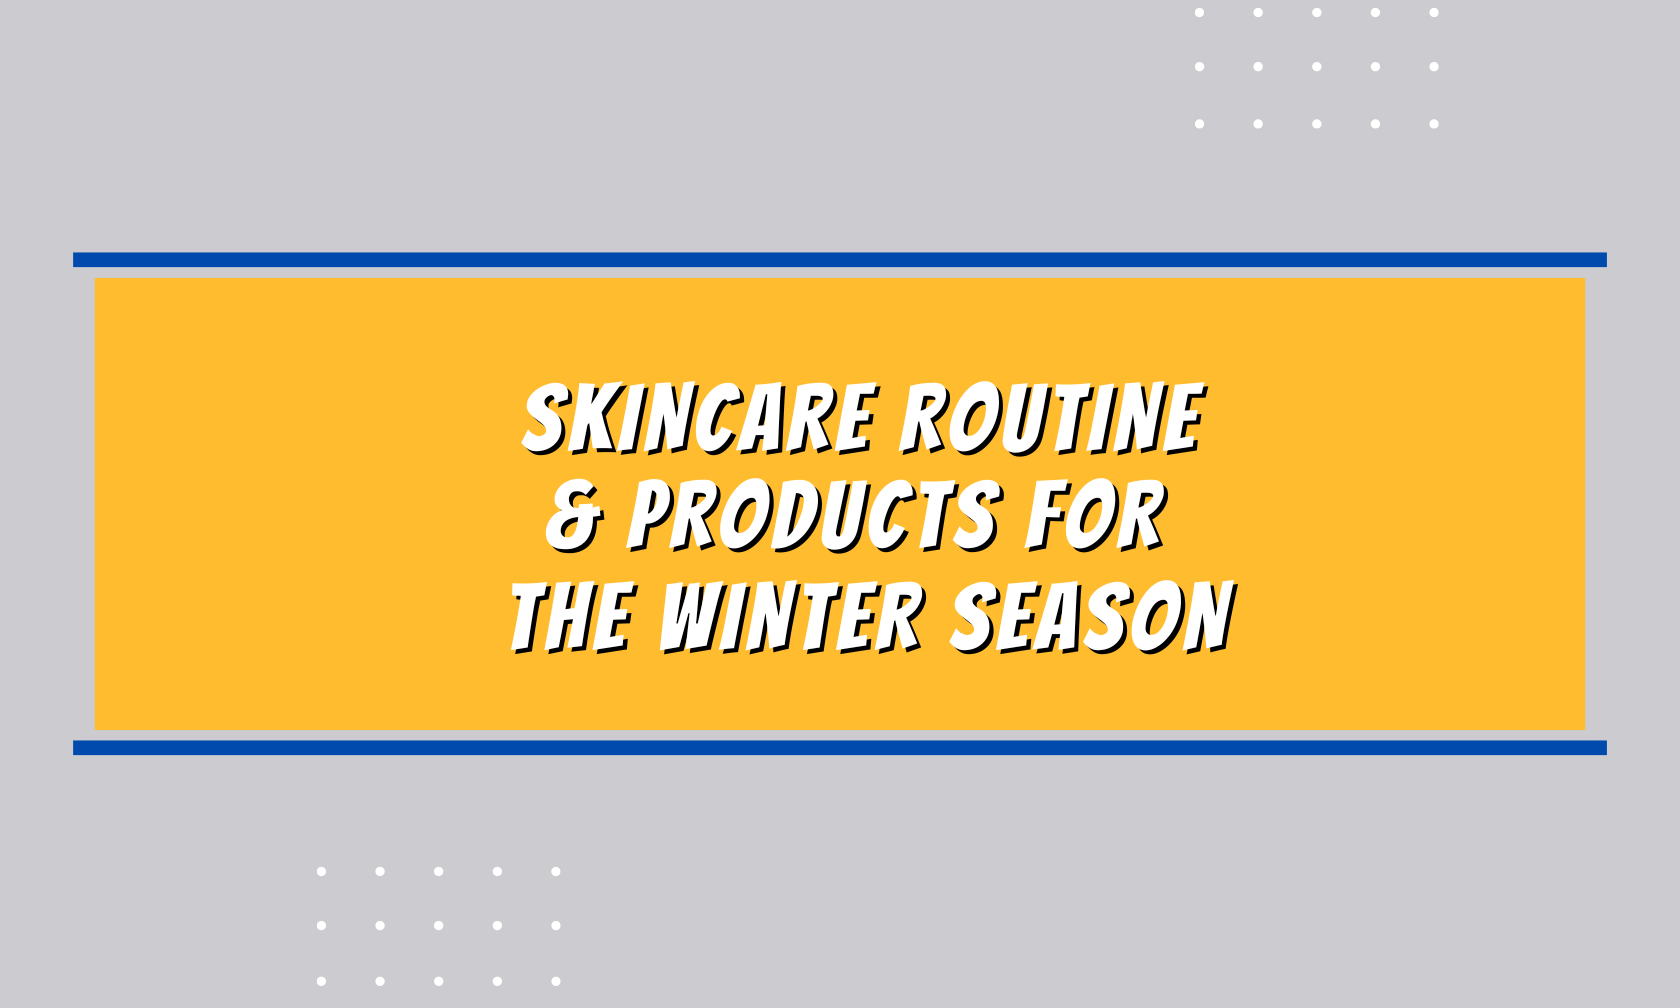 Skincare routine & products for the winter season